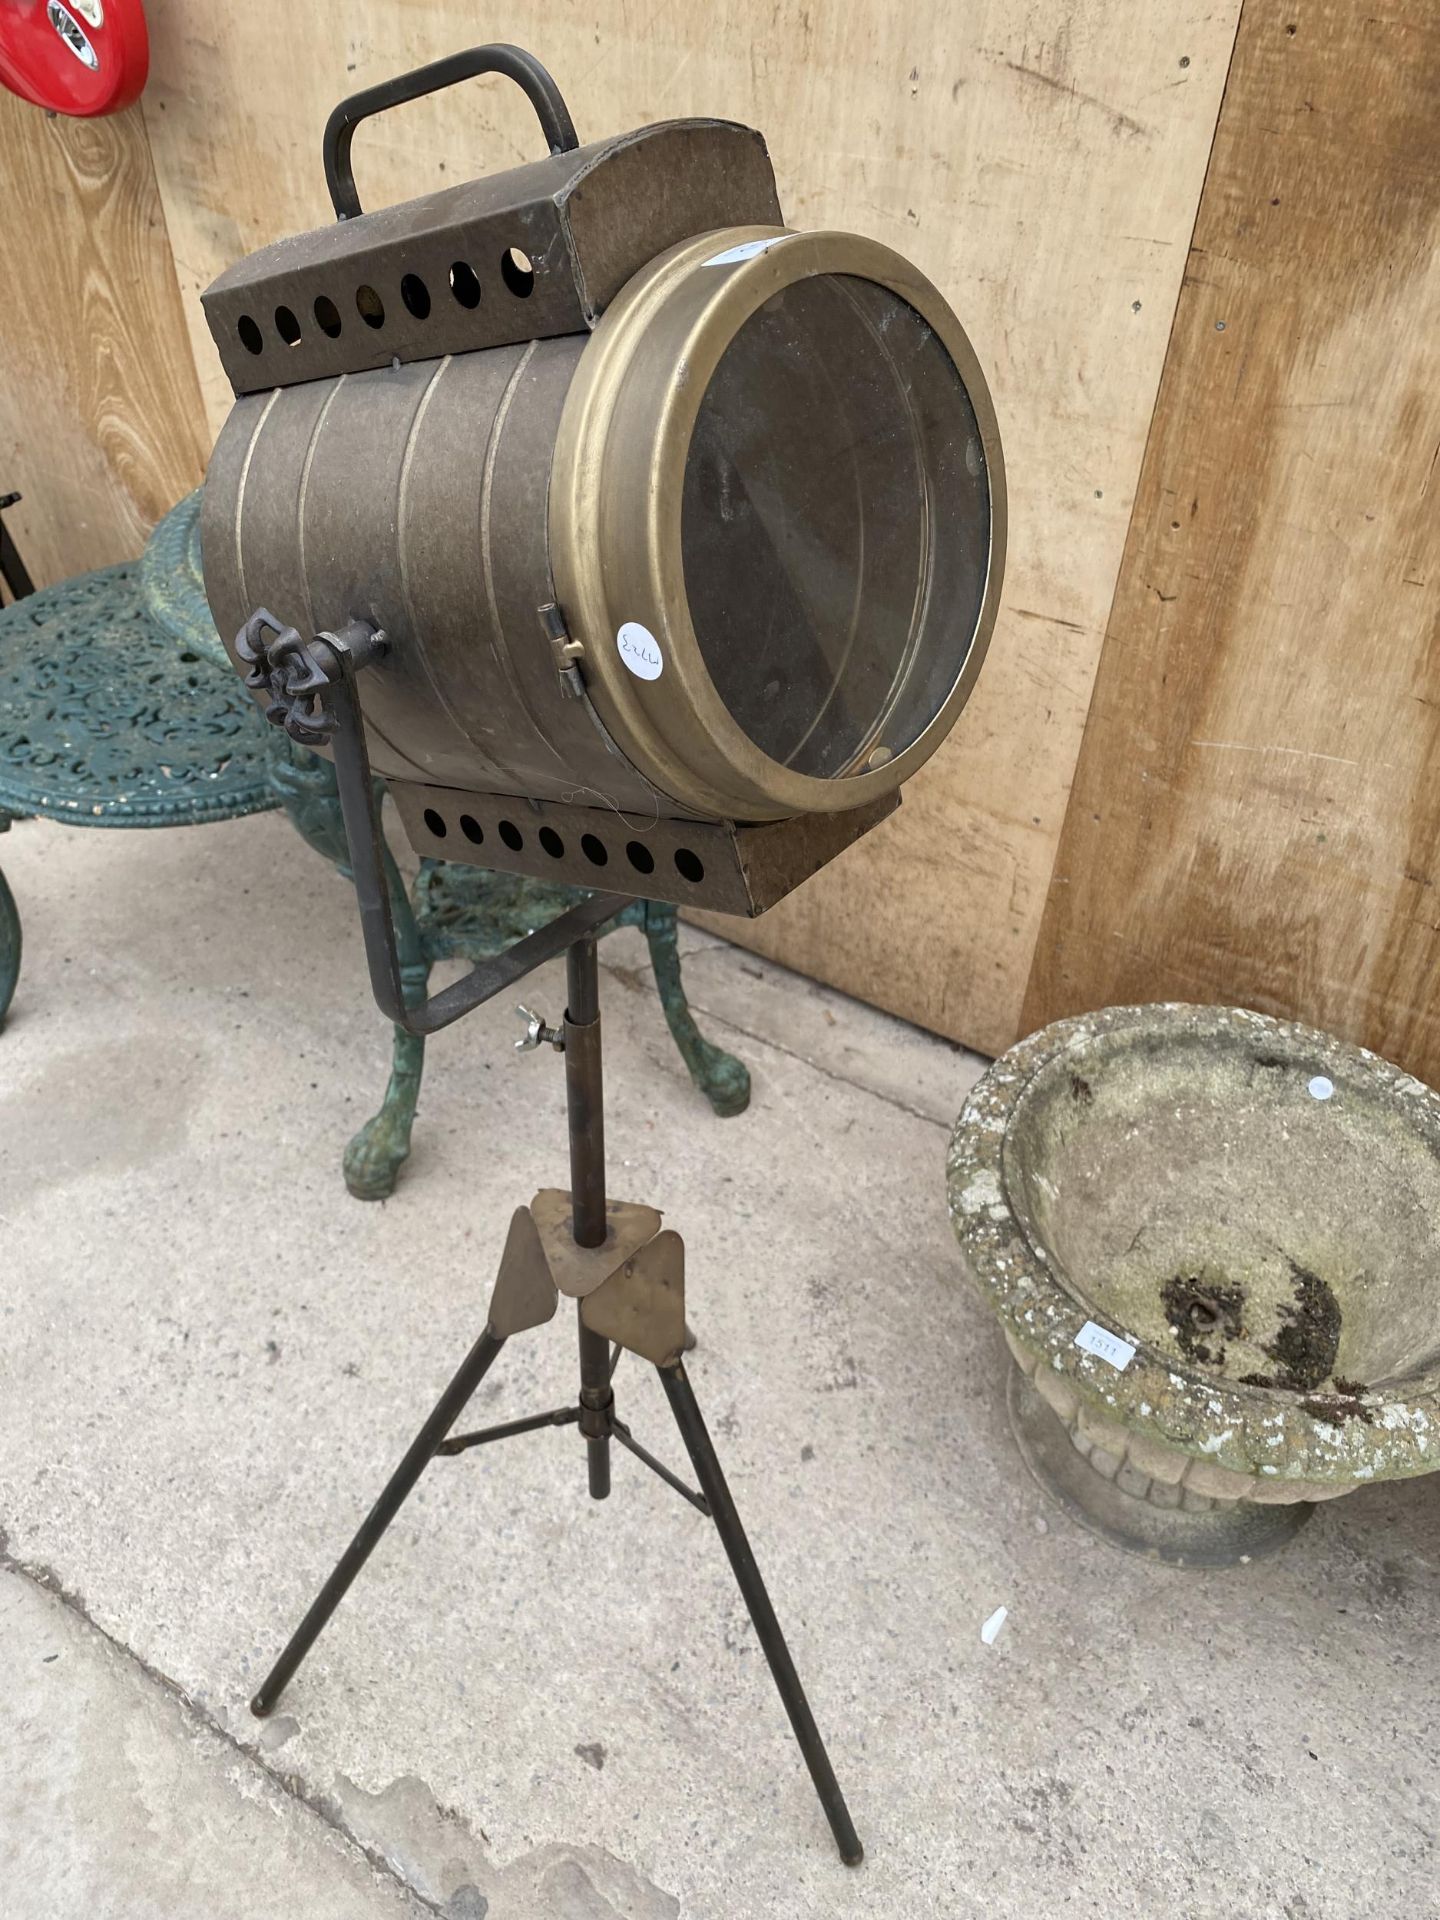 A VINTAGE STYLE THEARTE LIGHT FLOOR LAMP WITH TRIPOD BASE - Image 2 of 7